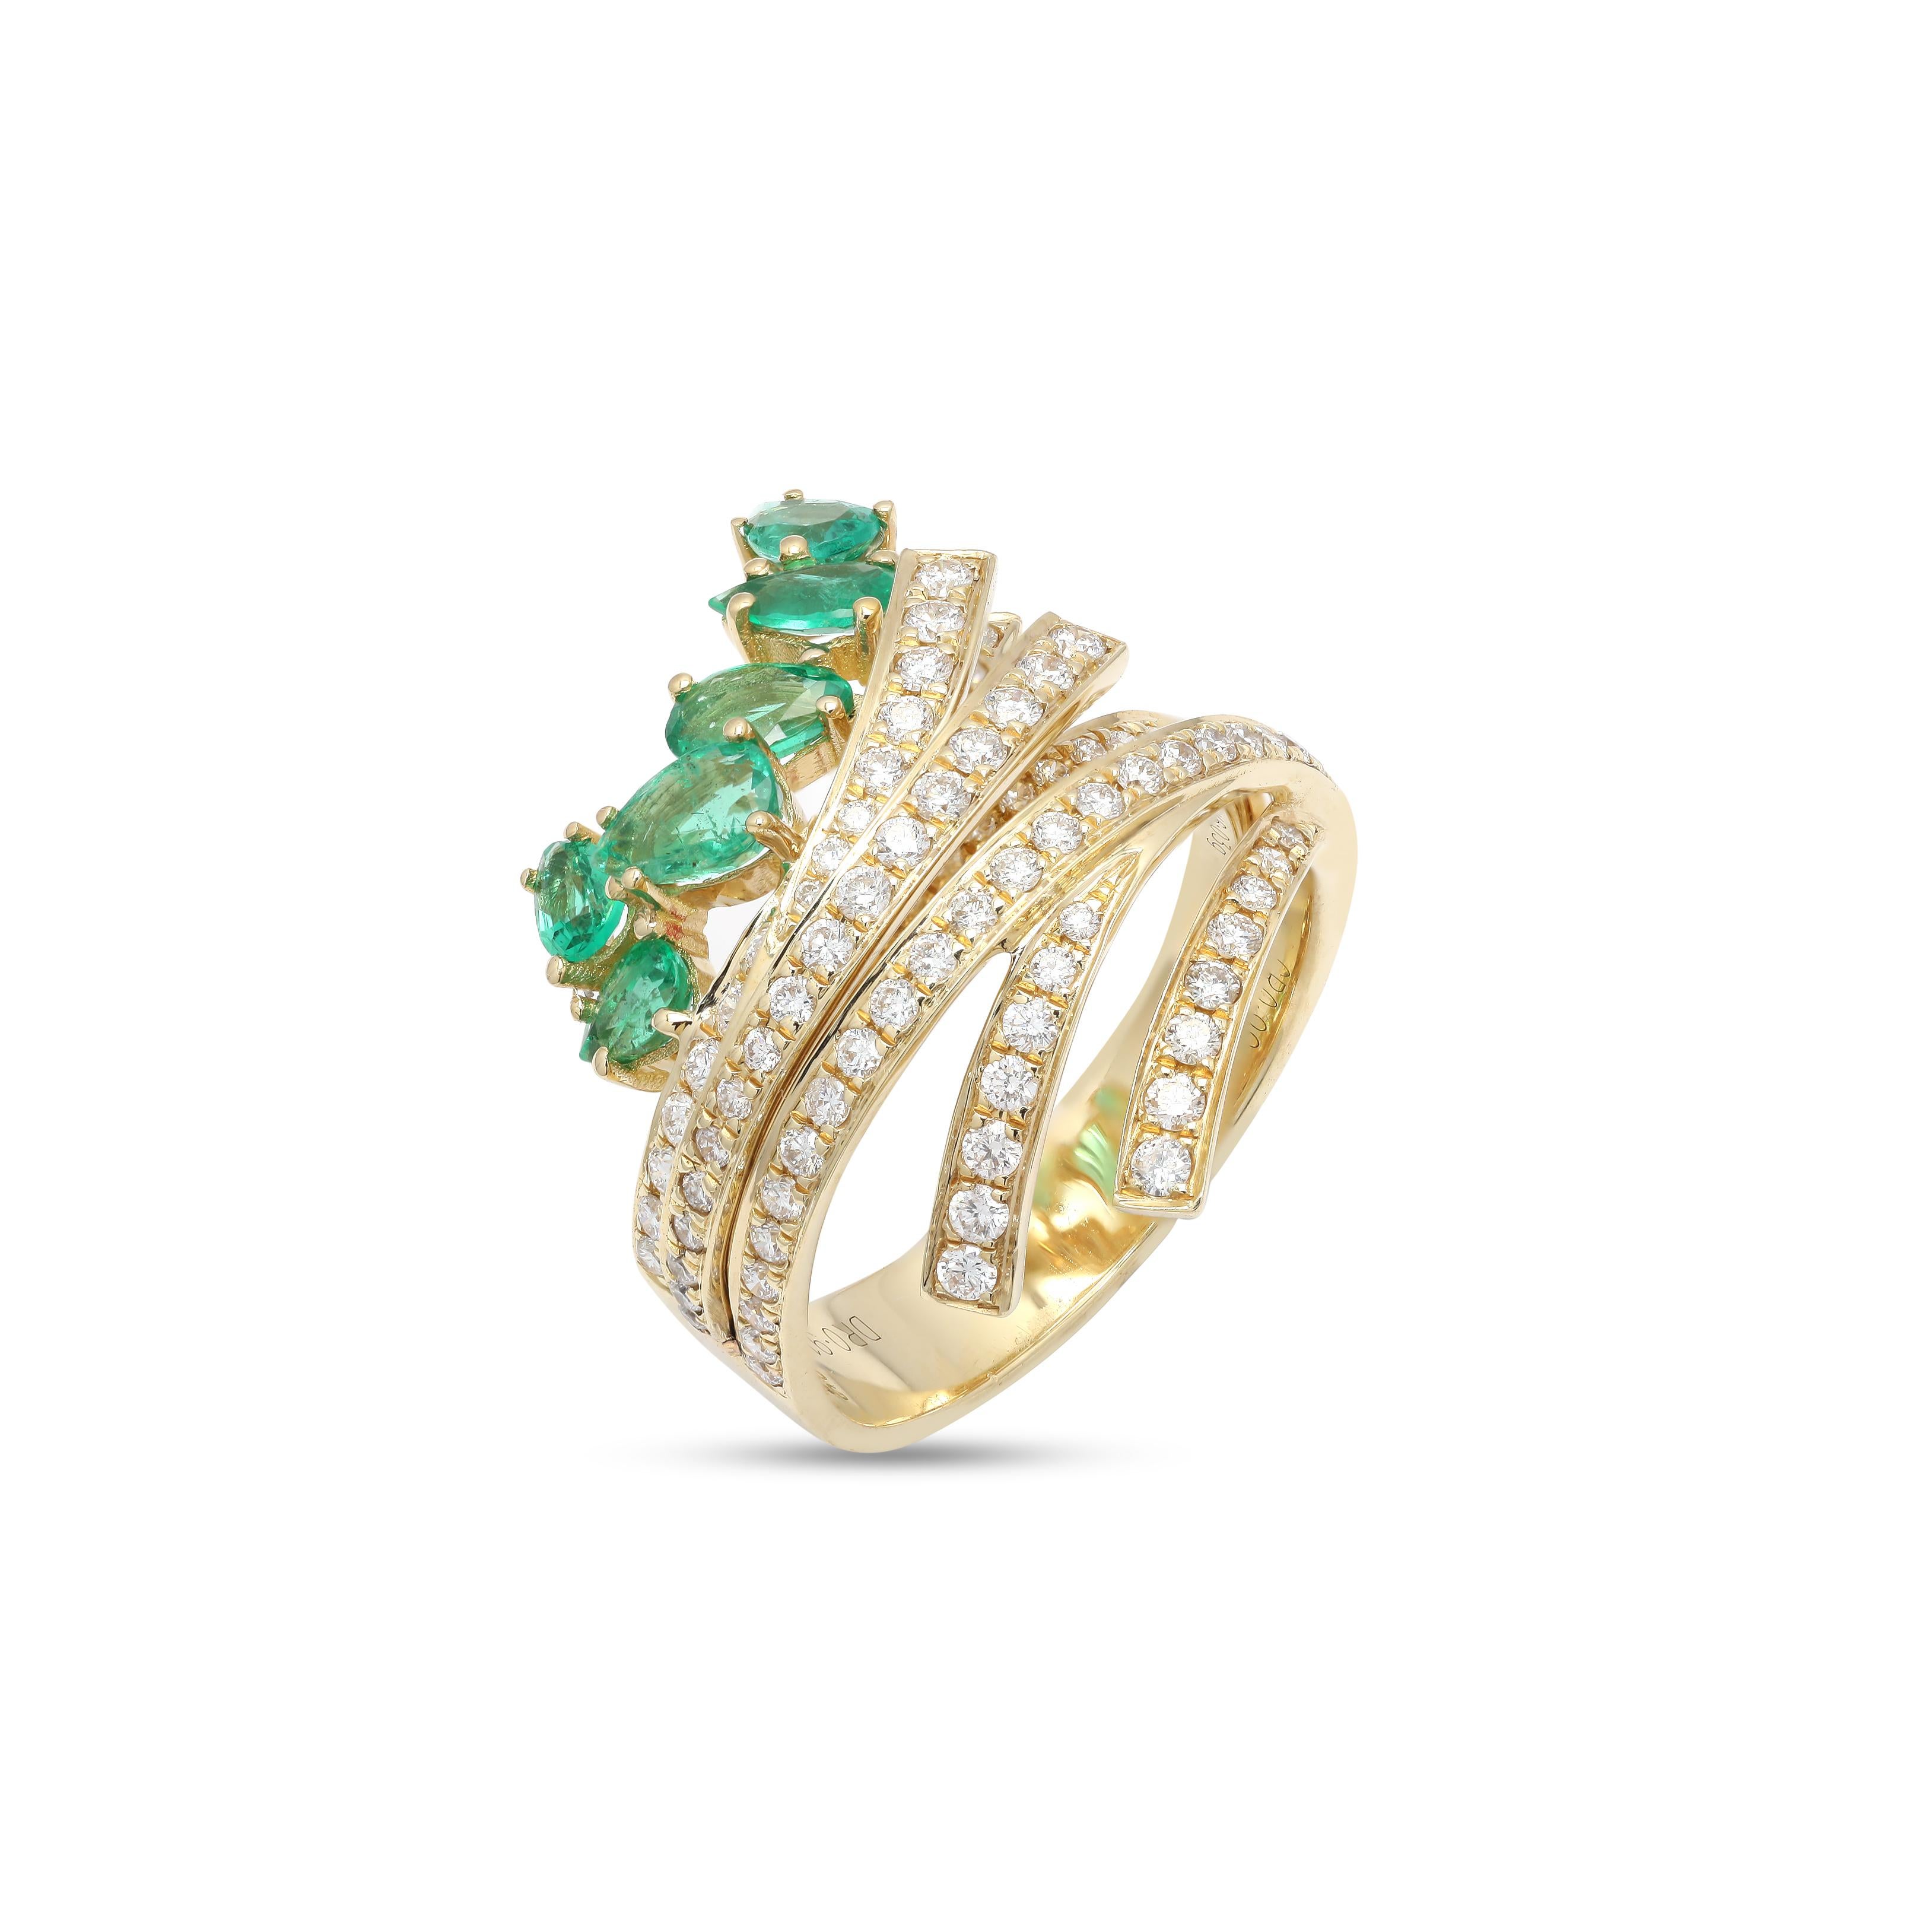 For Sale:  Modern Solid 14k Yellow Gold Diamond Emerald Wedding Party Ring, Emerald Ring 4